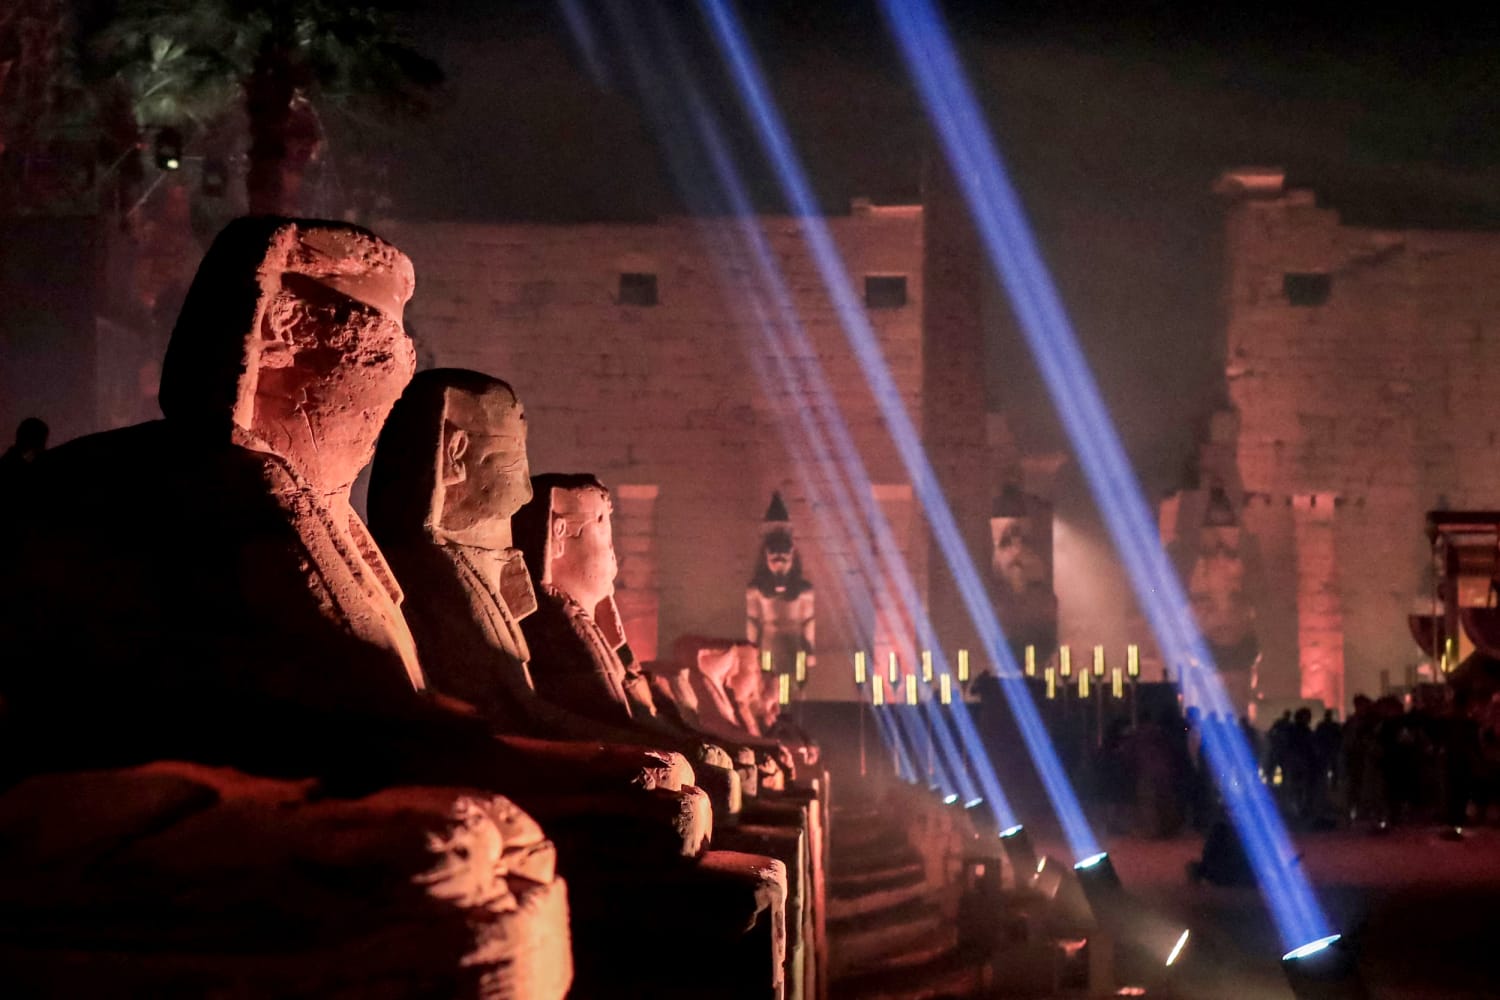 With huge celebration, Egypt reopens sphinx avenue that was covered in sand for centuries